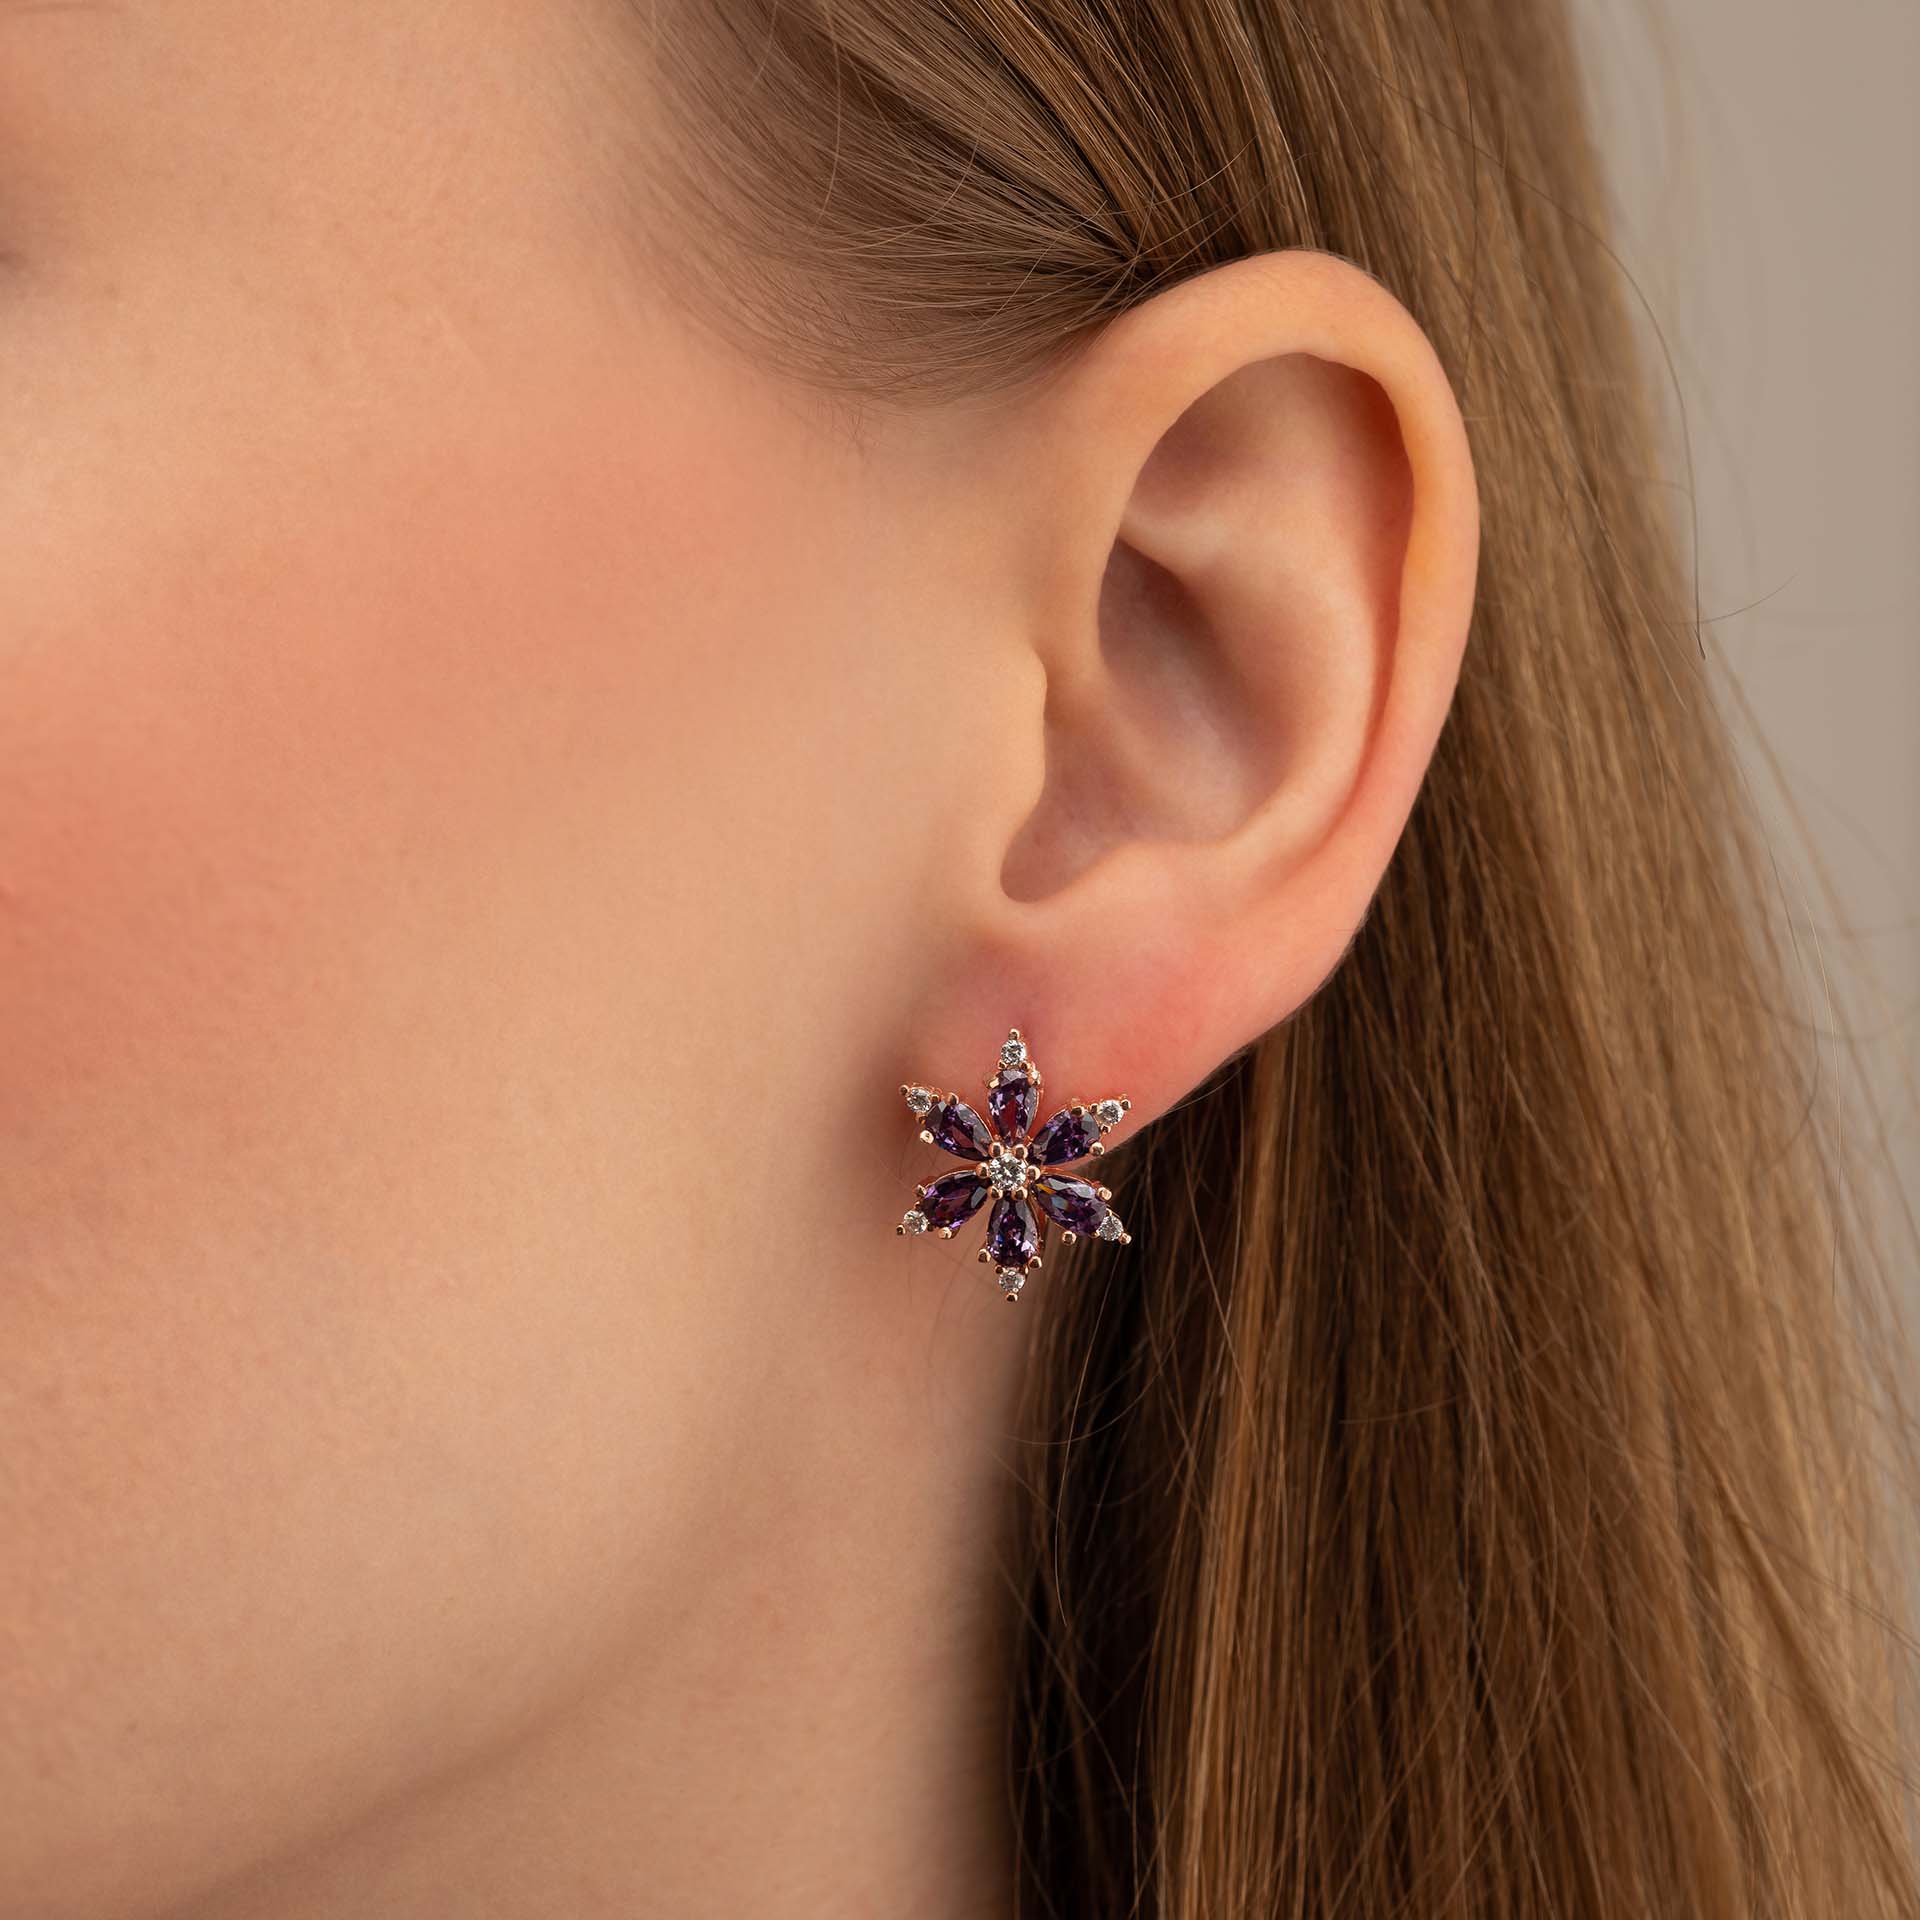 Aster Flower Silver Earrings with Amethyst Stone